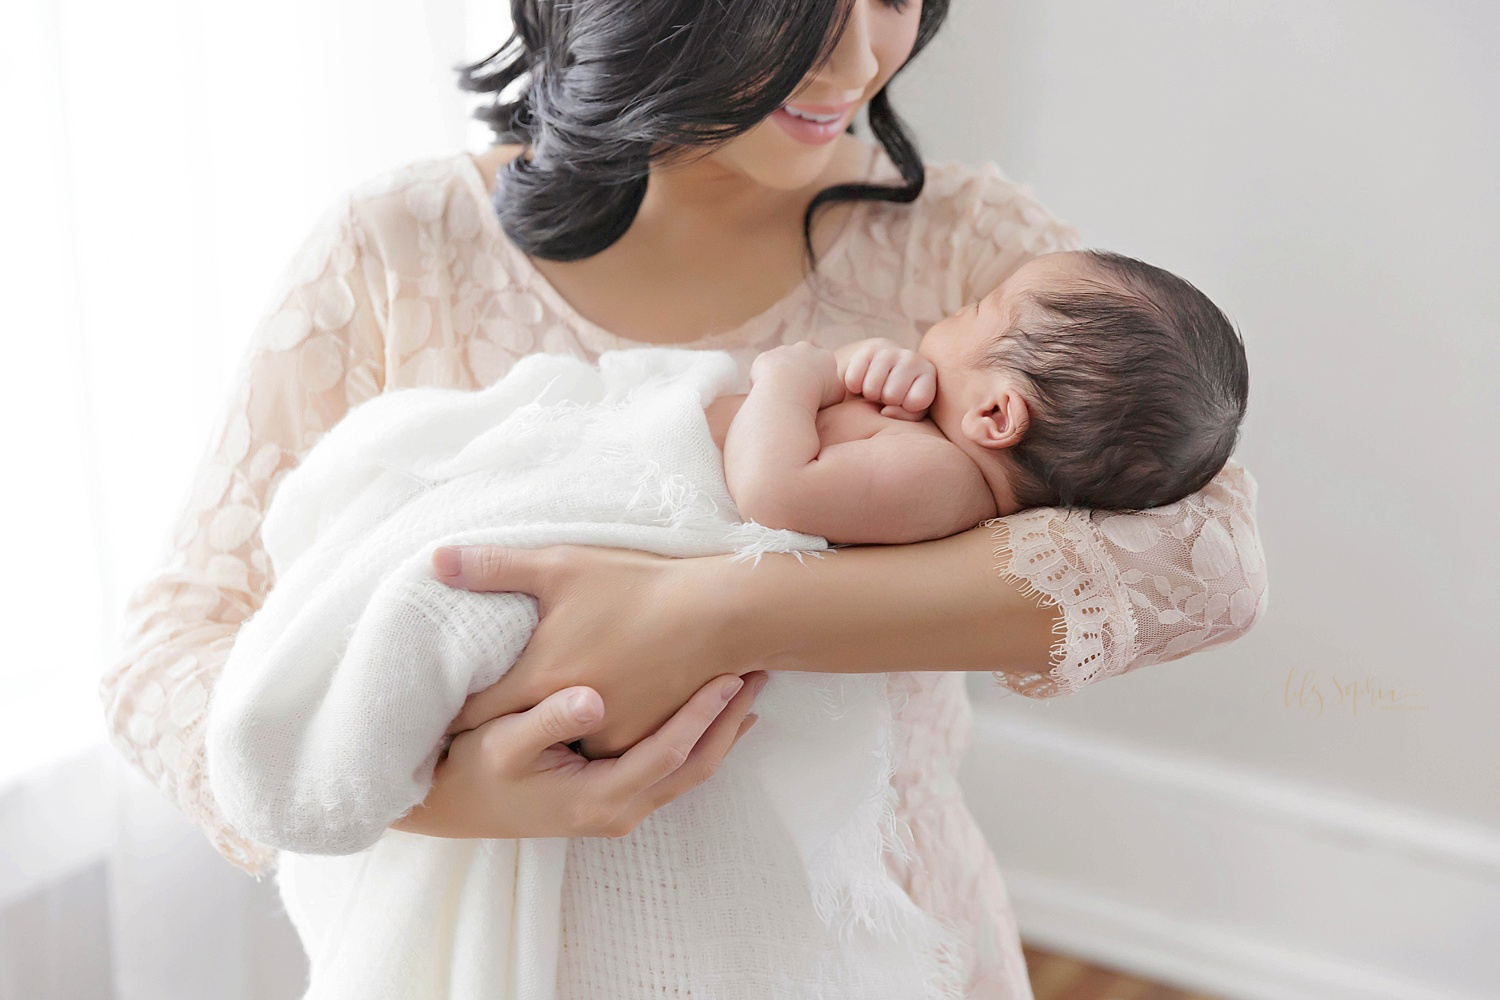  Image of a Filipino woman wearing a cream dress and cradling her sleeping newborn son, taken in the natural light studio of Lily Sophia Photography.&nbsp; 